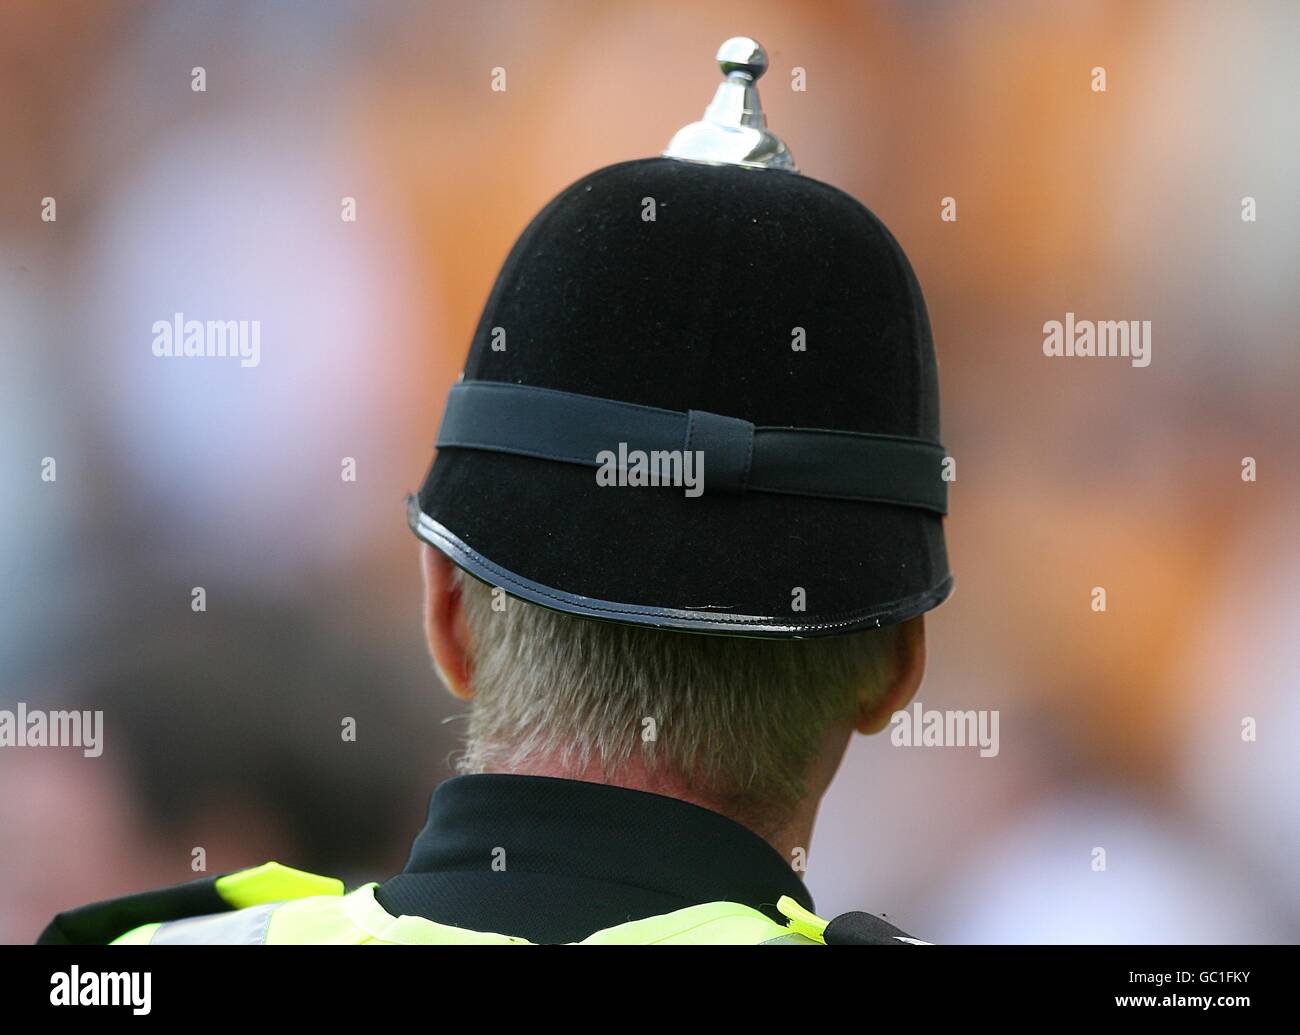 Soccer - Barclays Premier League - Hull City v Bolton Wanderers - KC Stadium. General view of the back of a policeman's helmet. Stock Photo